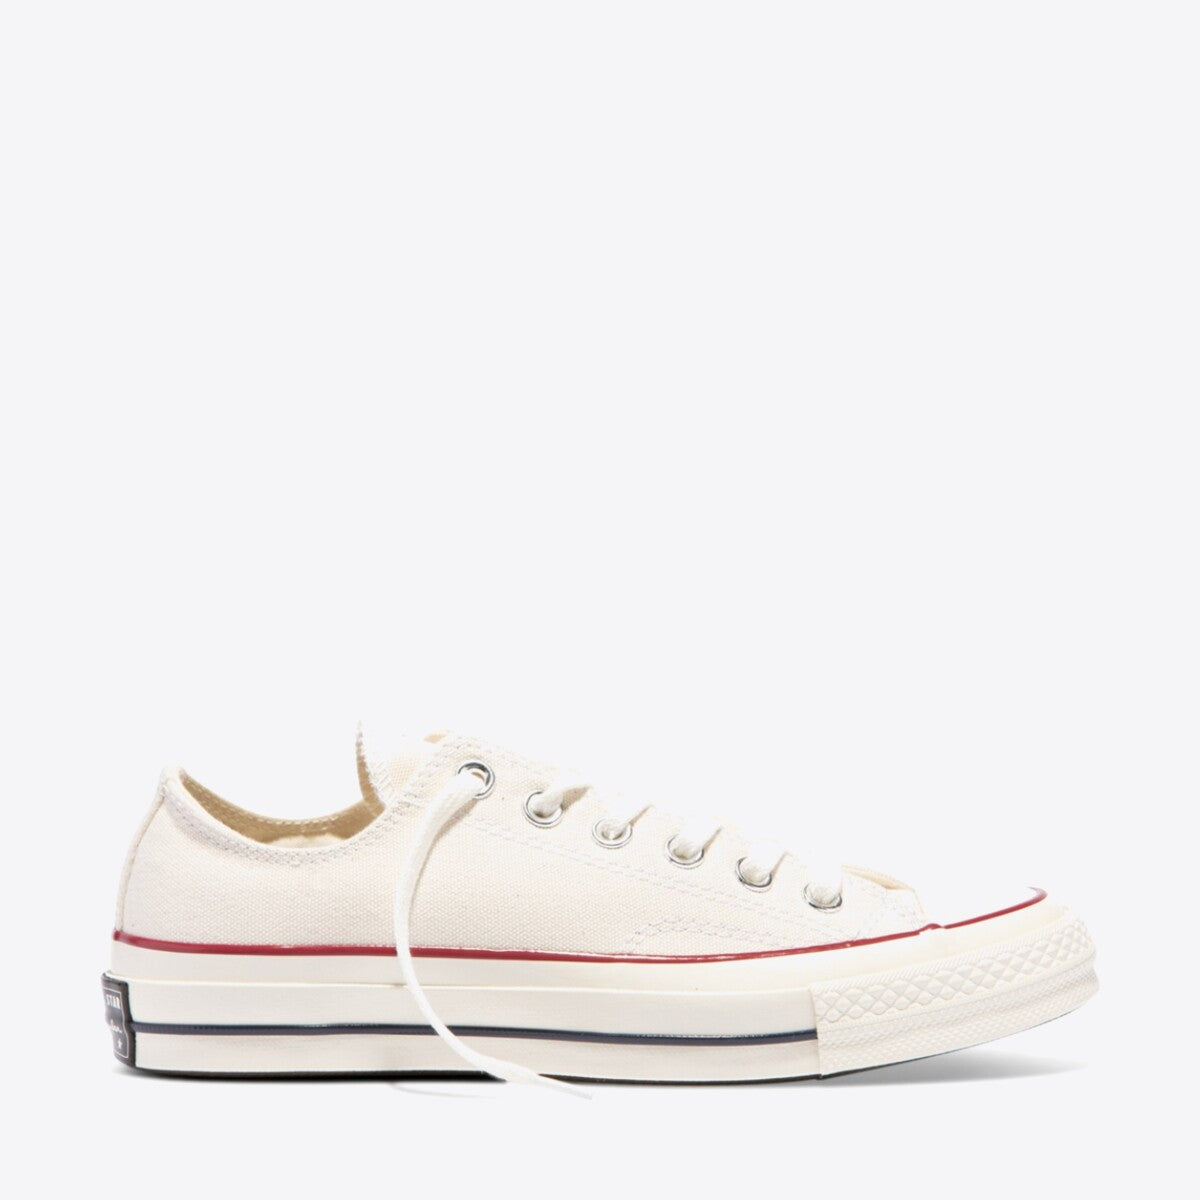 CONVERSE Chuck Taylor All Star 70 Canvas Low Parchment - Image 2